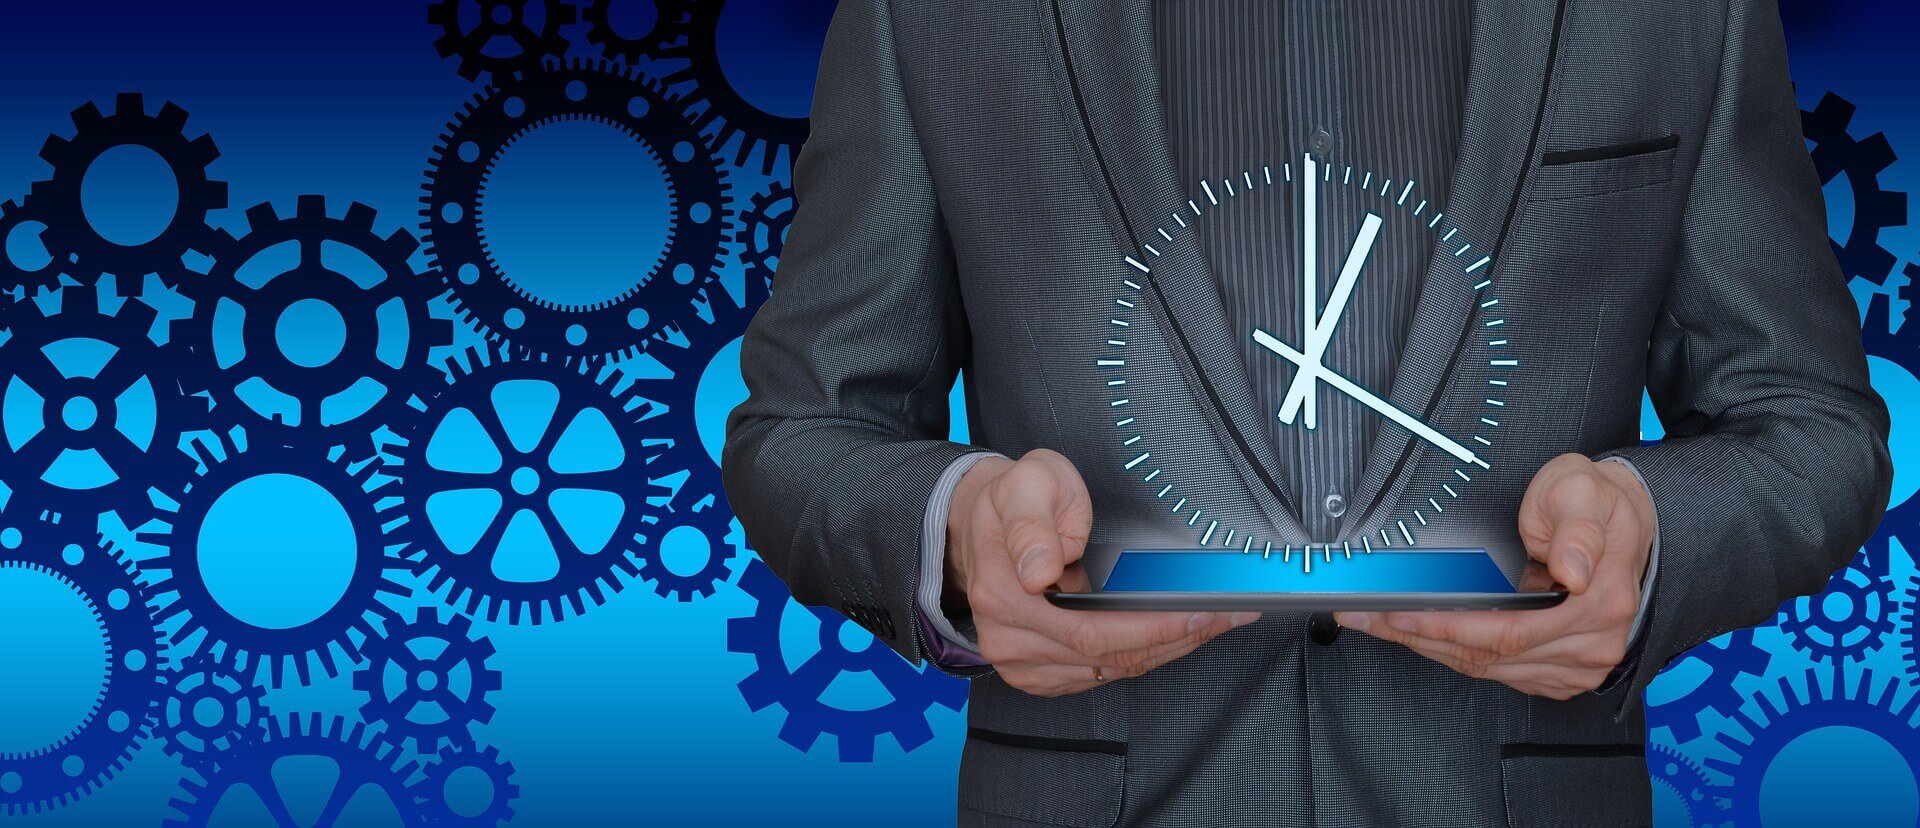 A person is holding a tablet with a clock out of it. The blue colored background symbolizes the execution and optimization processes.